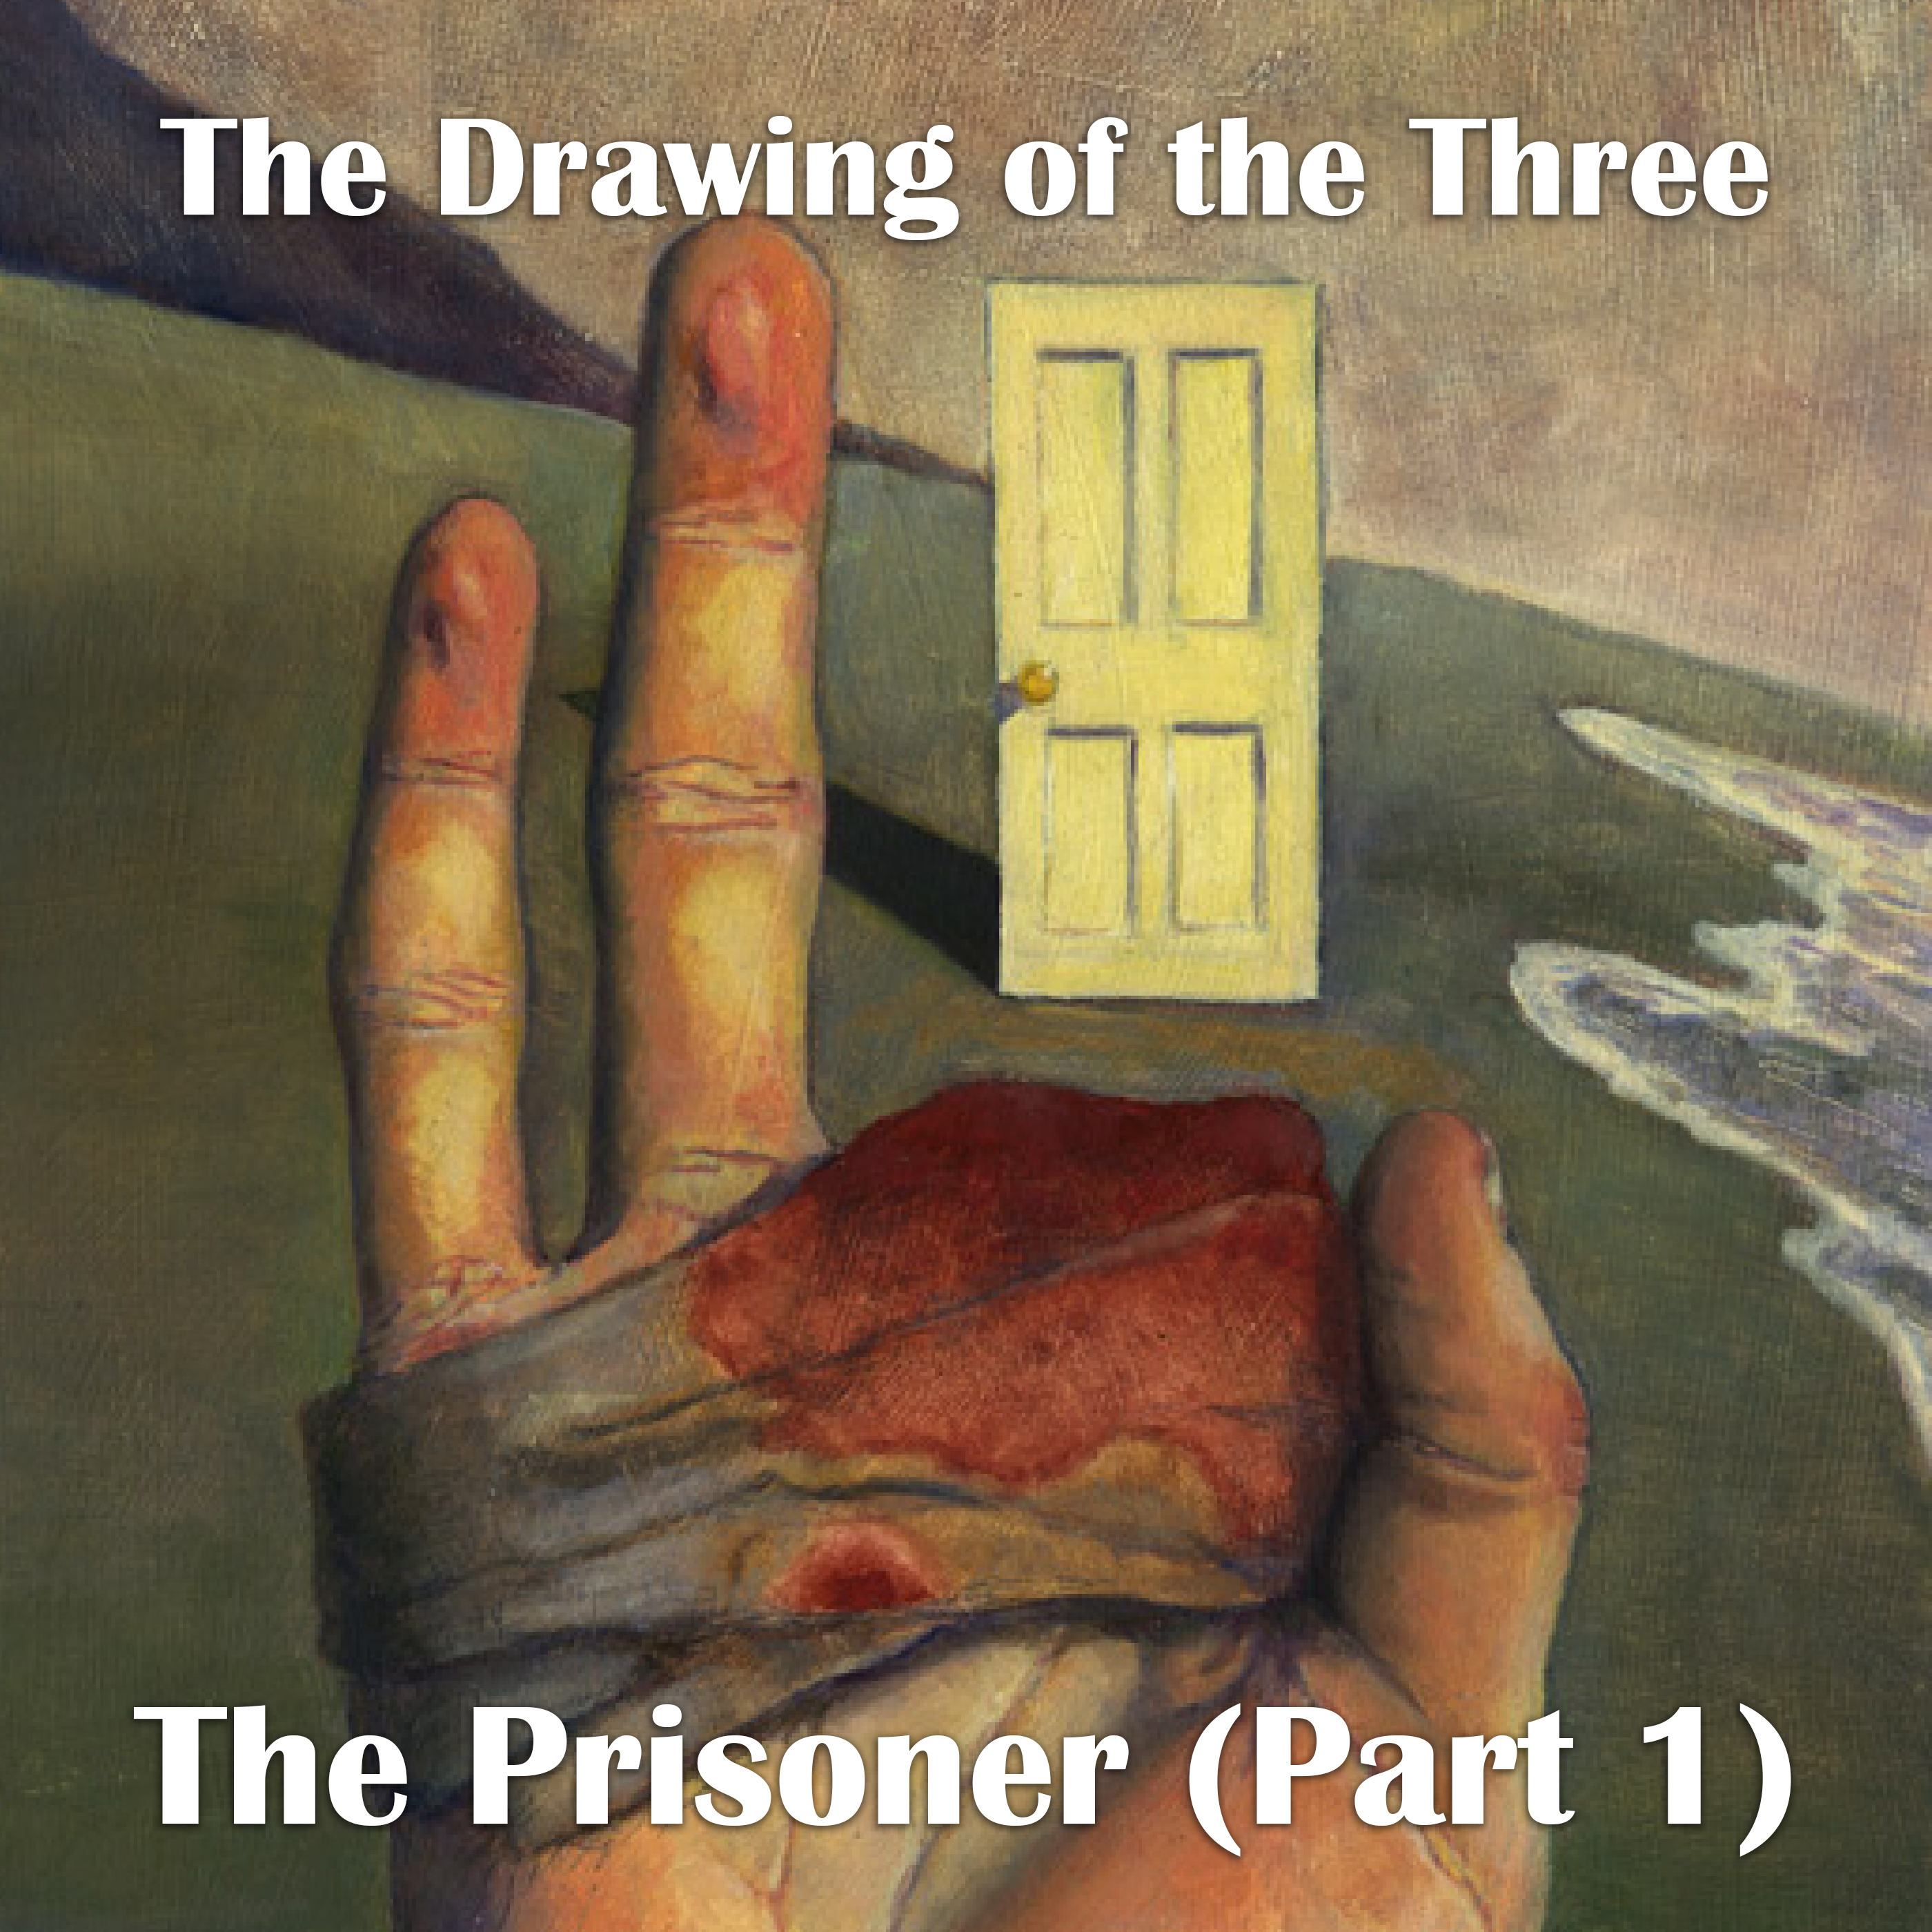 Episode 7: The Drawing of the Three: ”The Prisoner (Part 1)”